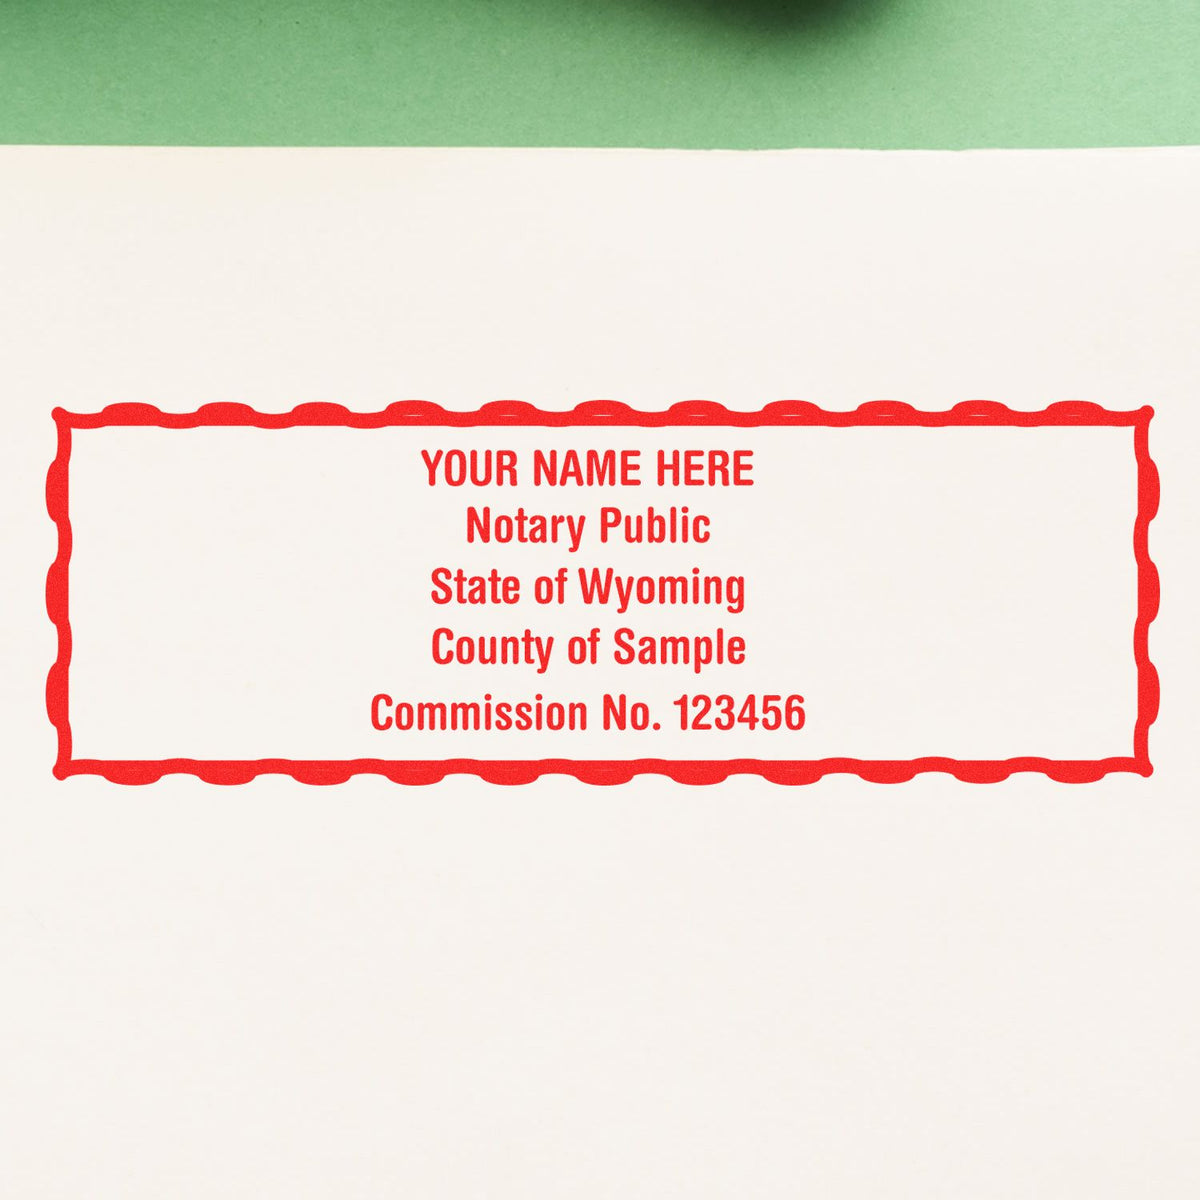 The Heavy-Duty Wyoming Rectangular Notary Stamp stamp impression comes to life with a crisp, detailed photo on paper - showcasing true professional quality.